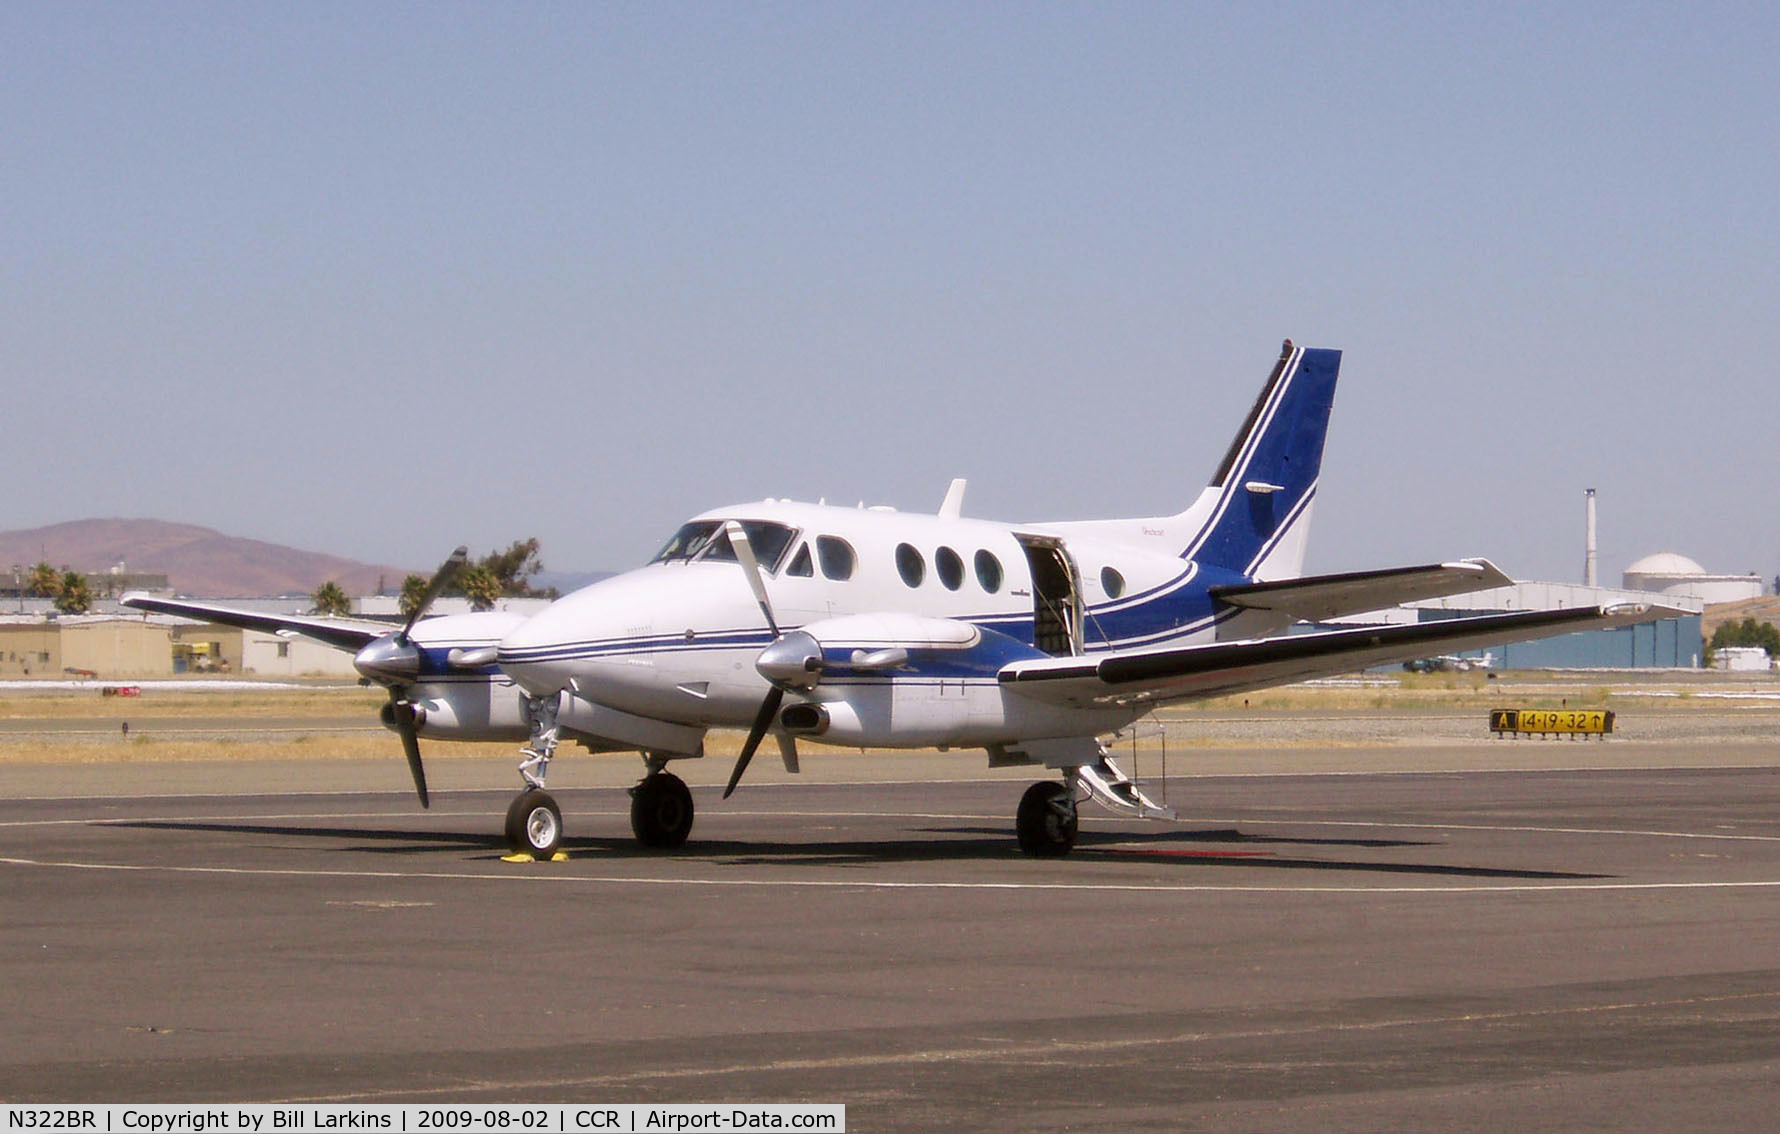 N322BR, 1989 Beech C90A King Air C/N LJ-1222, Visitor from Illionis